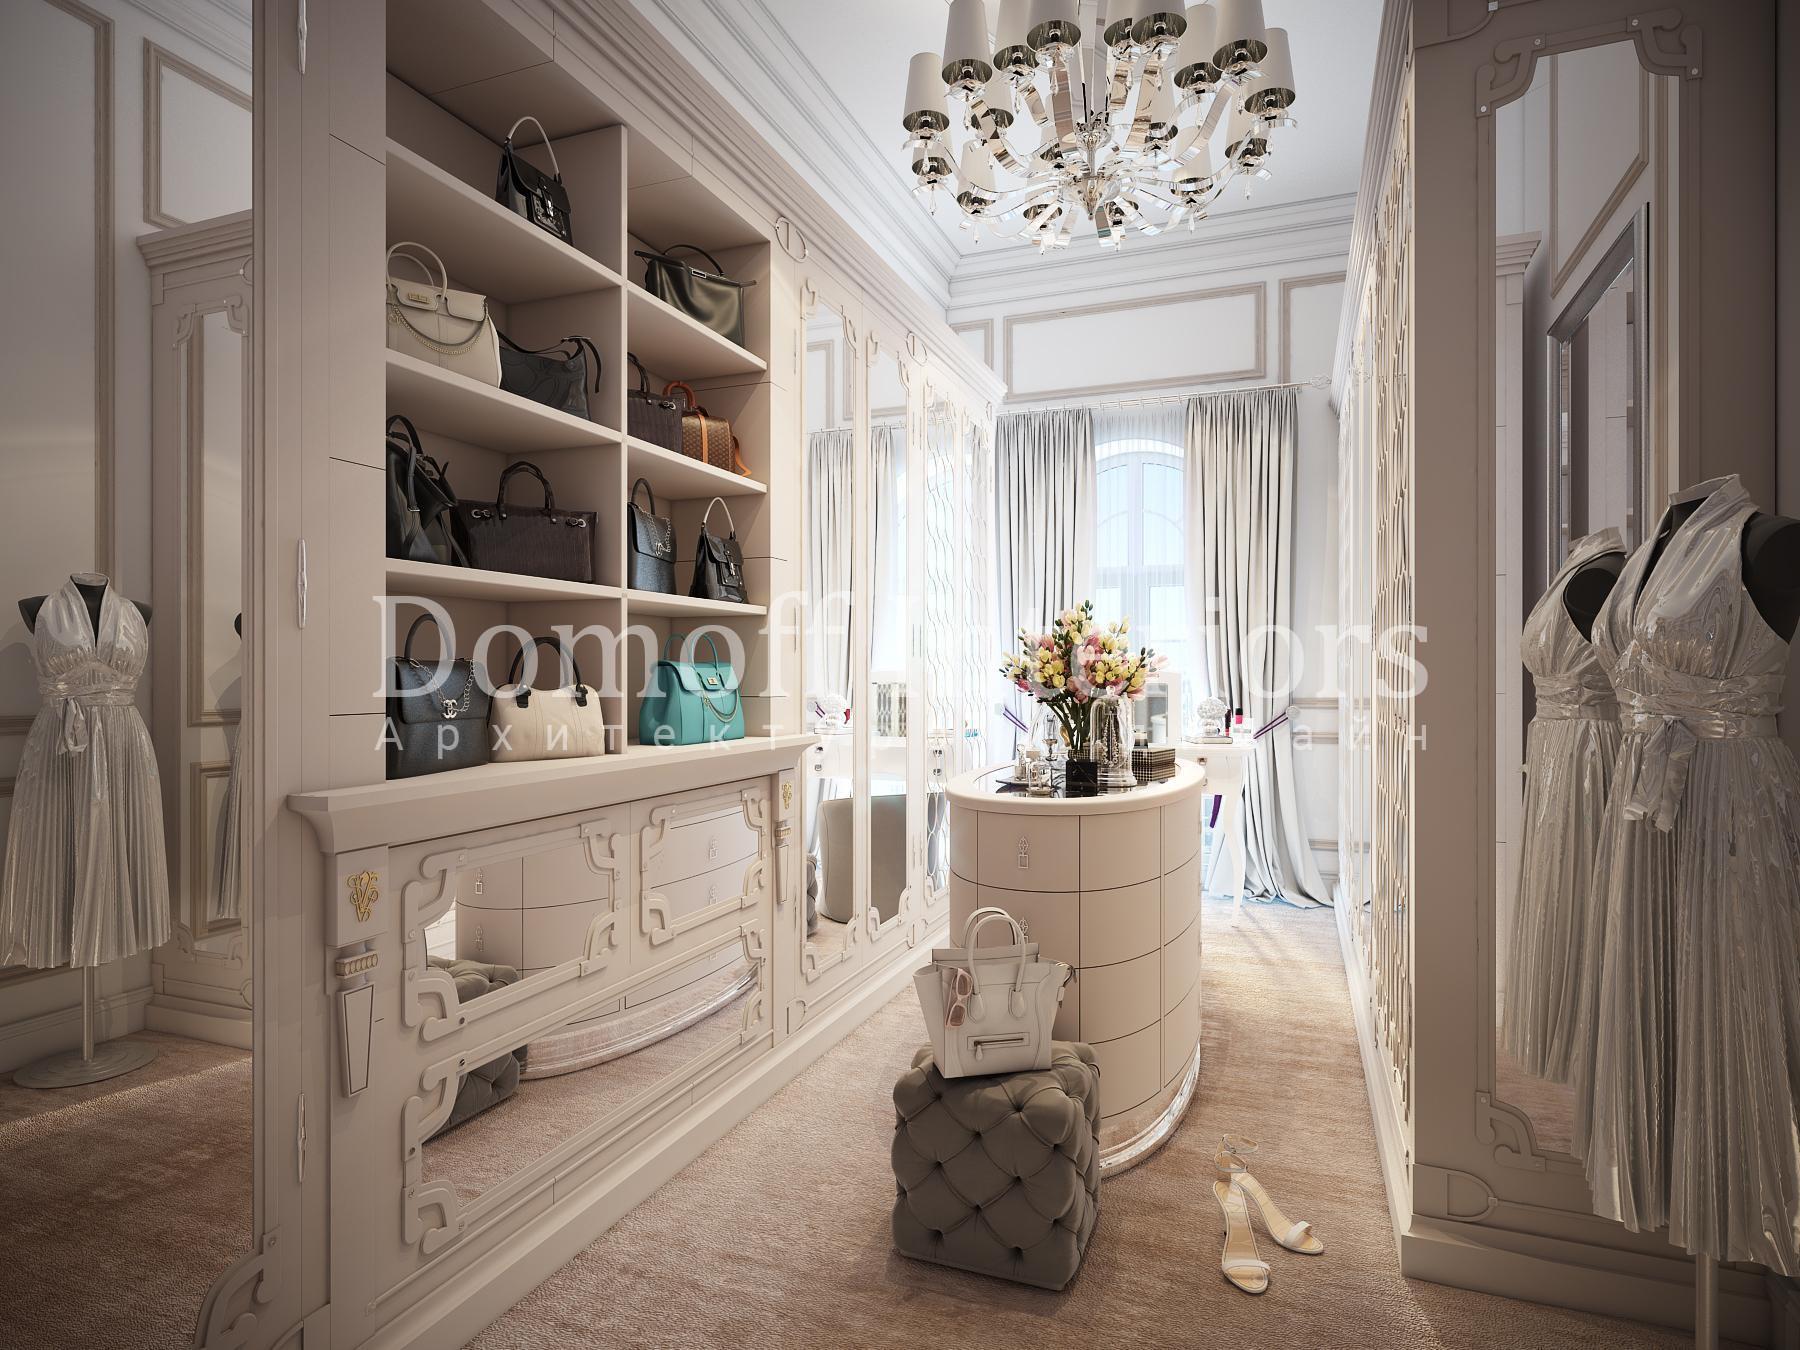 Master bedroom's dressing room made in the style of Contemporary classics